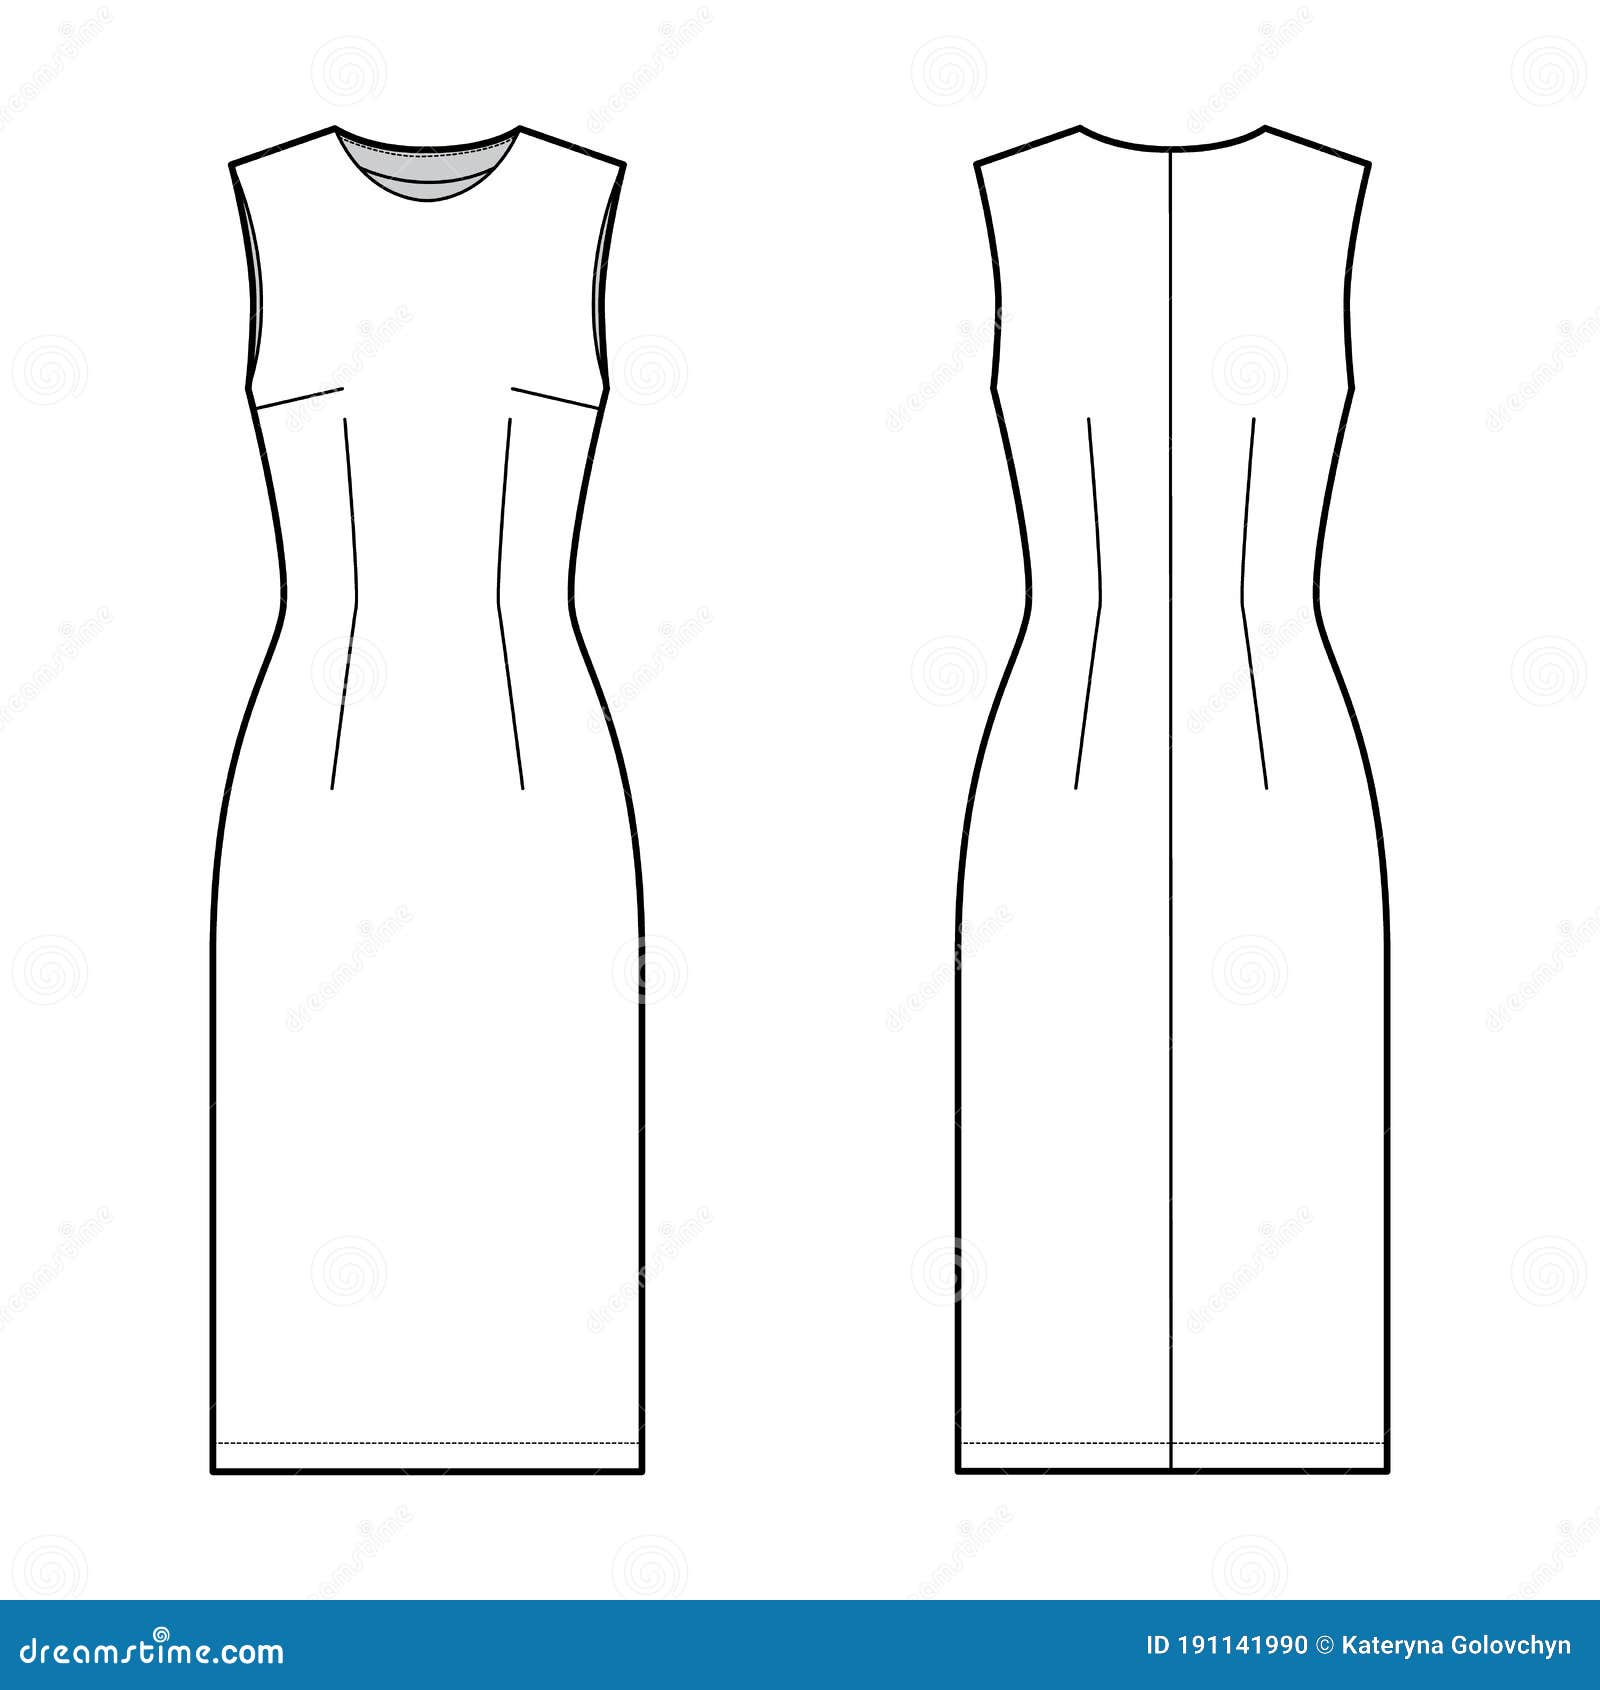 Sheath Dress Technical Fashion Illustration with Fitted Body, Oval Neck ...